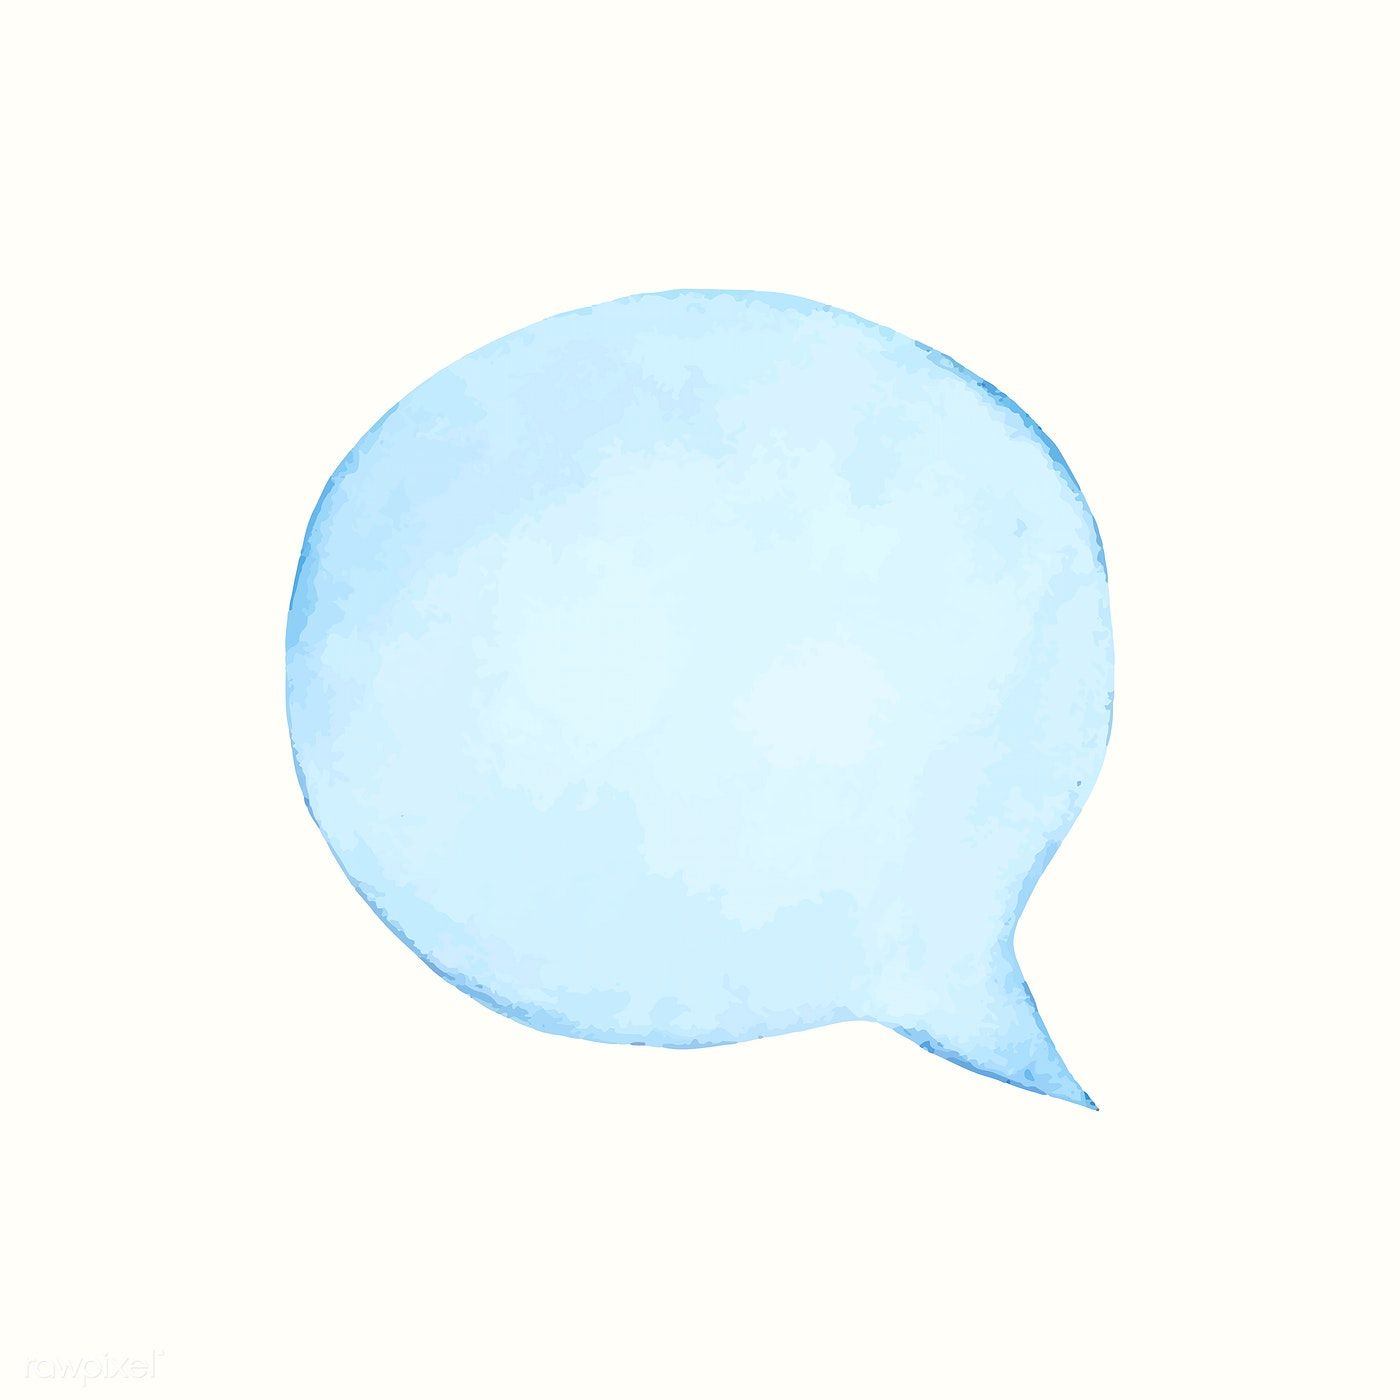 Illustration of an empty colorful speech bubble. free image by rawpixel.com / Aum. Speech bubble, Cute drawings, Illustration